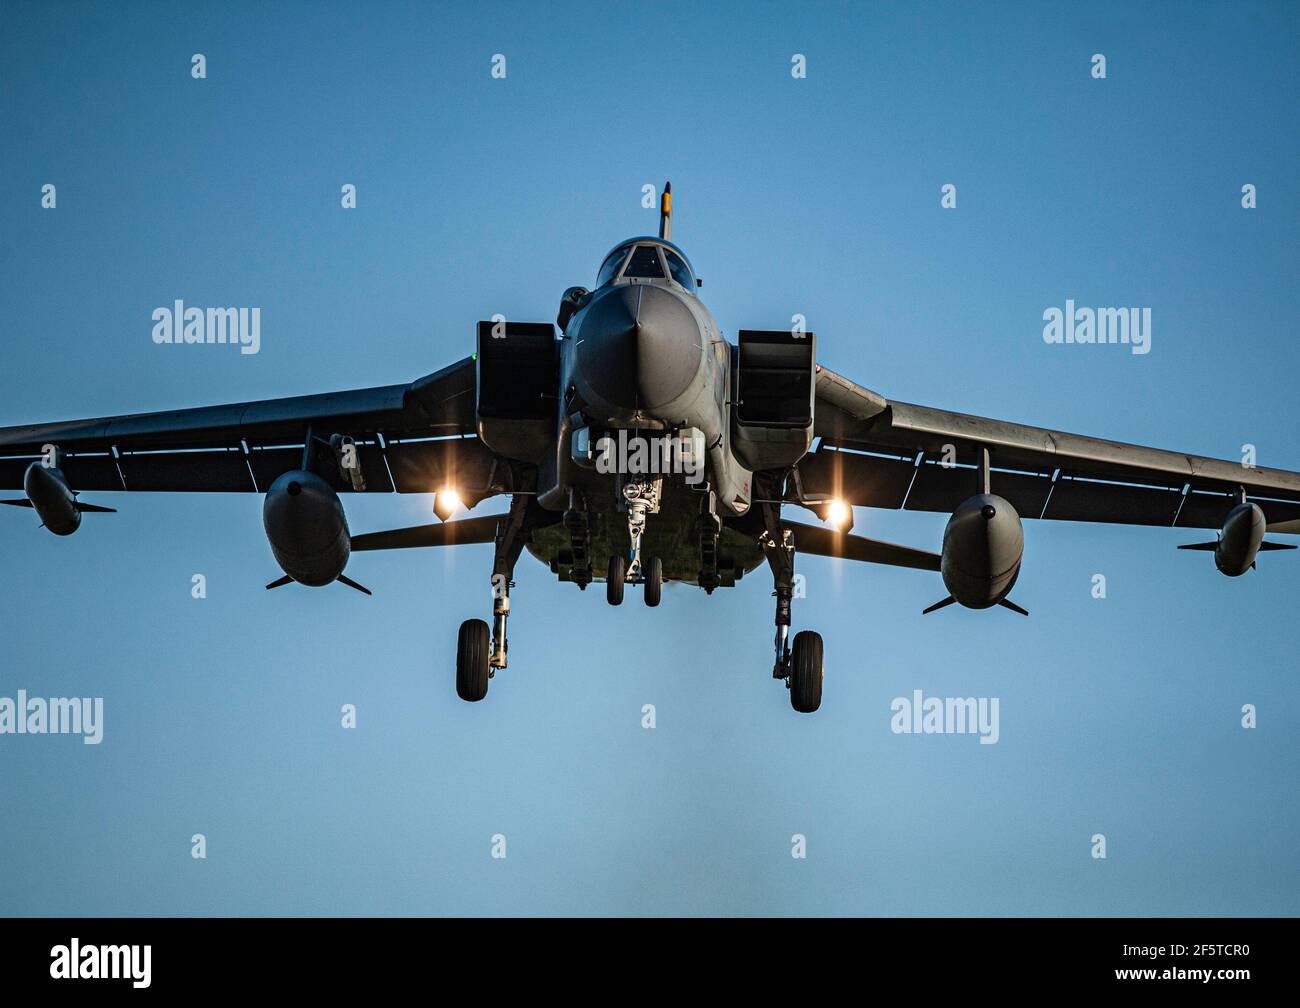 Panavia GR4 schnelle RAF Jet Swing Wing Bomber Flugzeuge kommen bei RAF Lossiemouth Aircraft in Moray, North East Scotland landen. Stockfoto